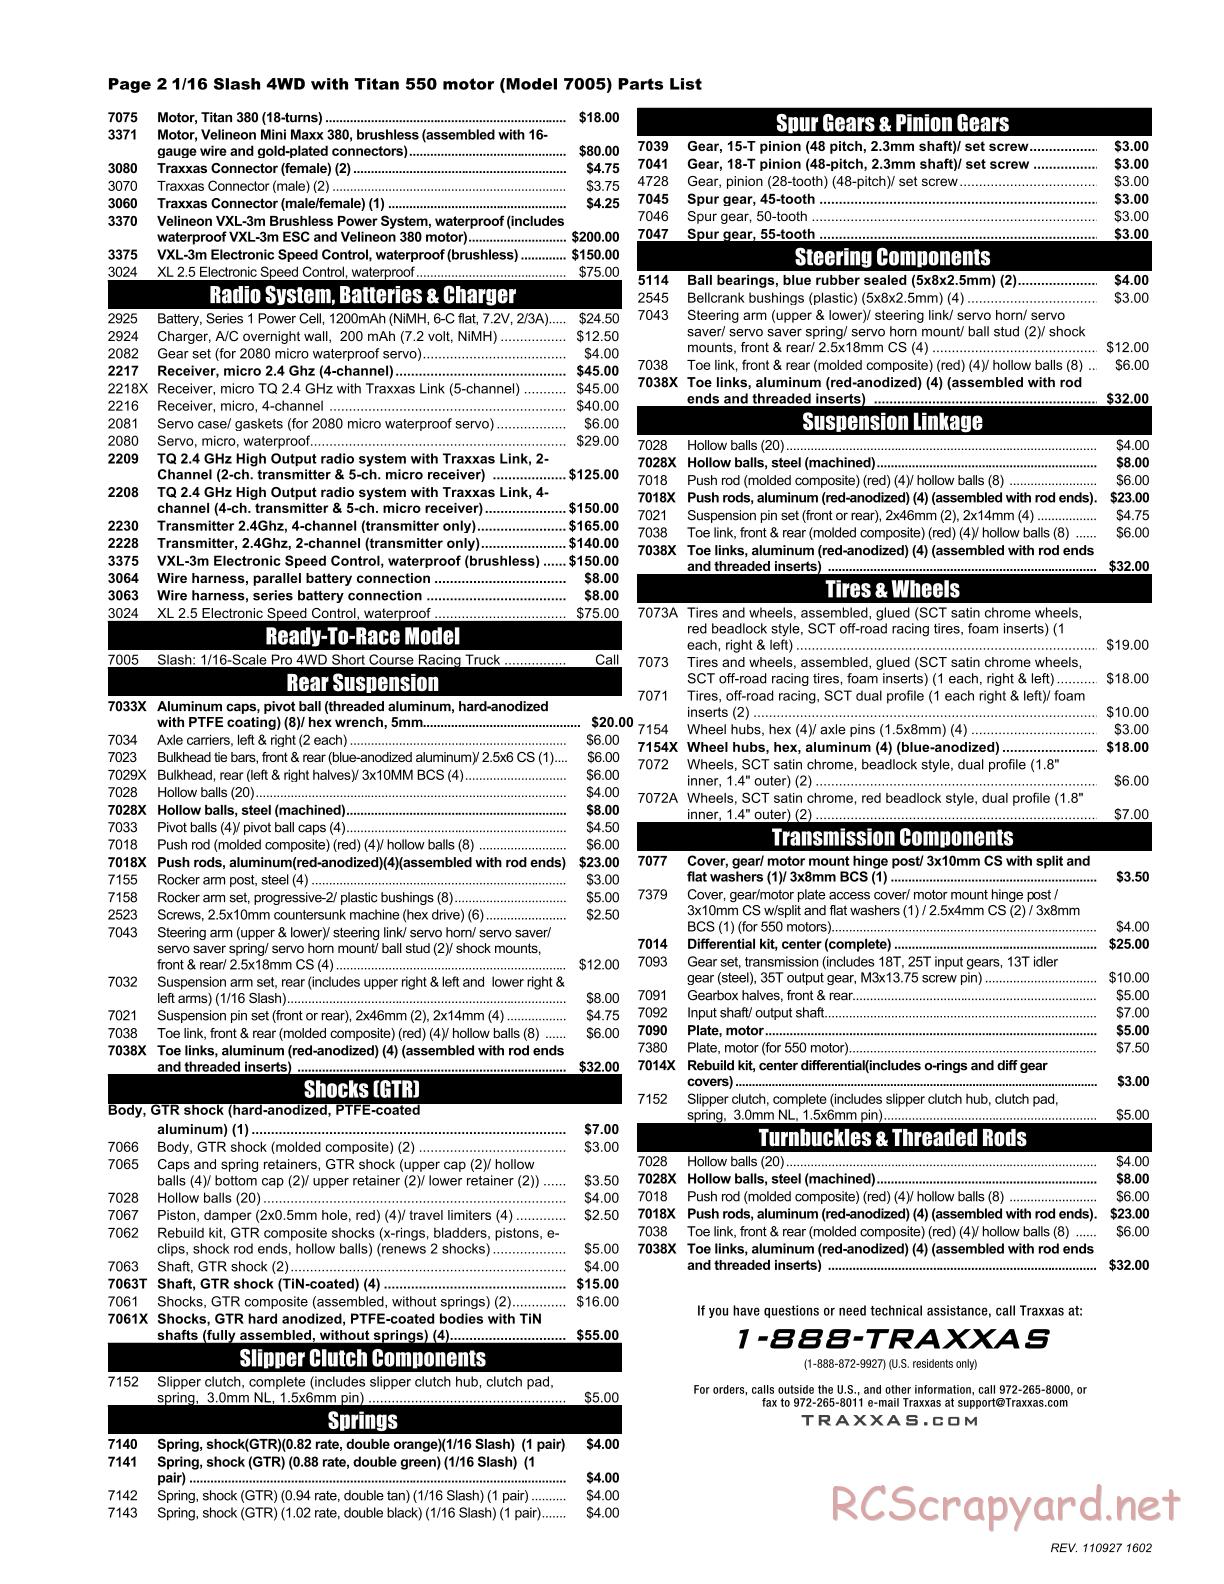 Traxxas - 1/16 Slash 4WD Brushed - Parts List - Page 2